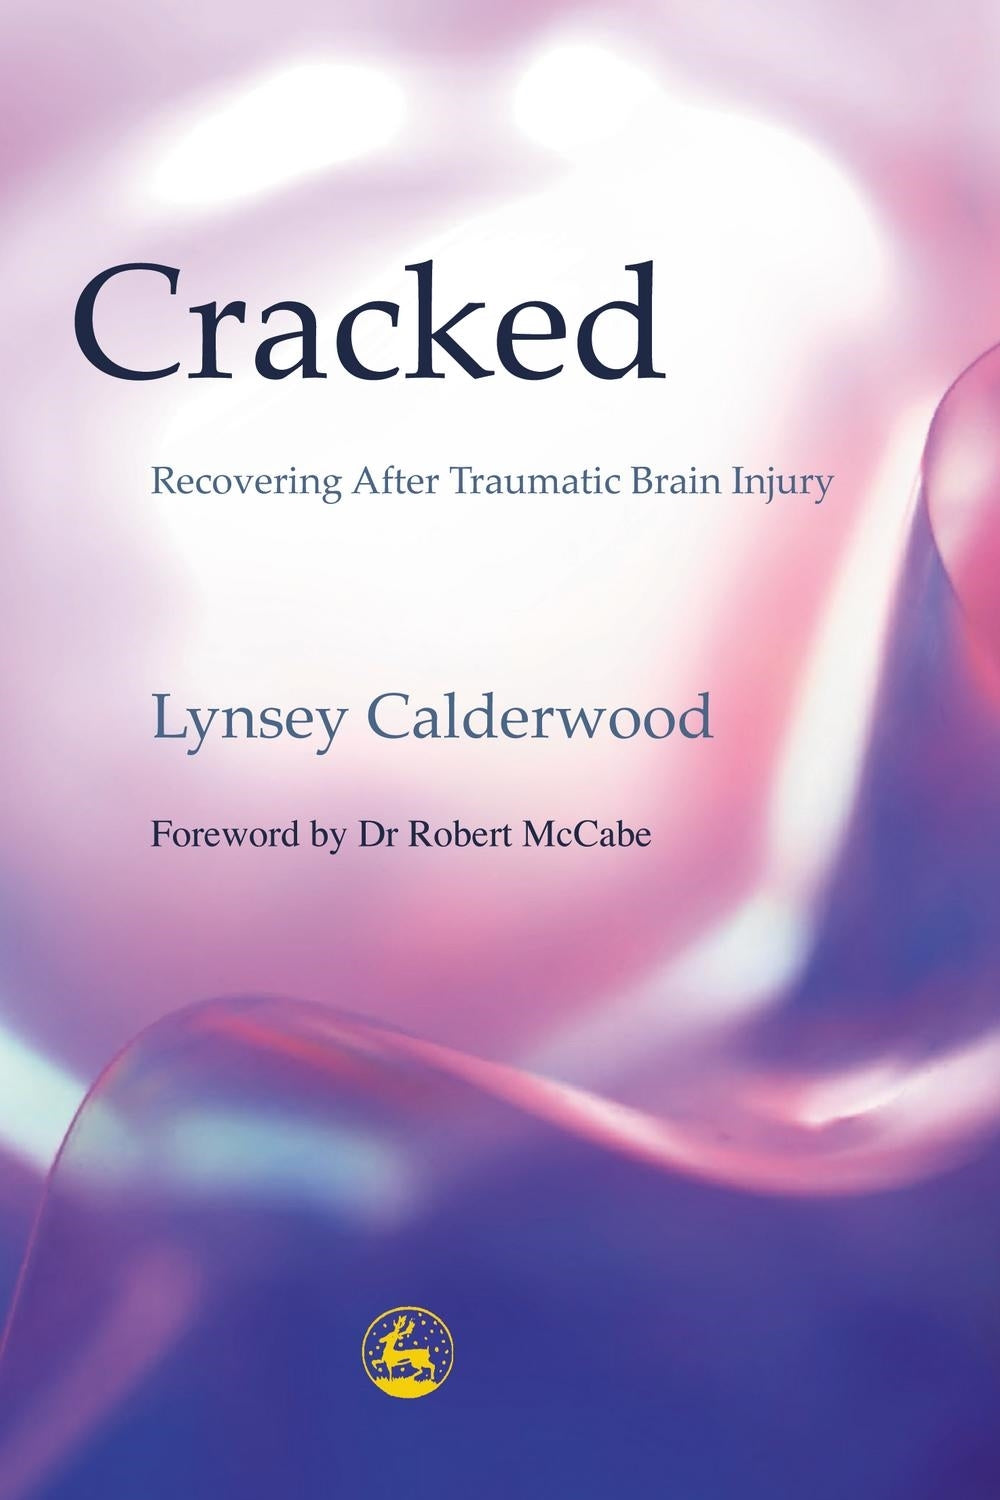 Cracked by Ely Percy Calderwood